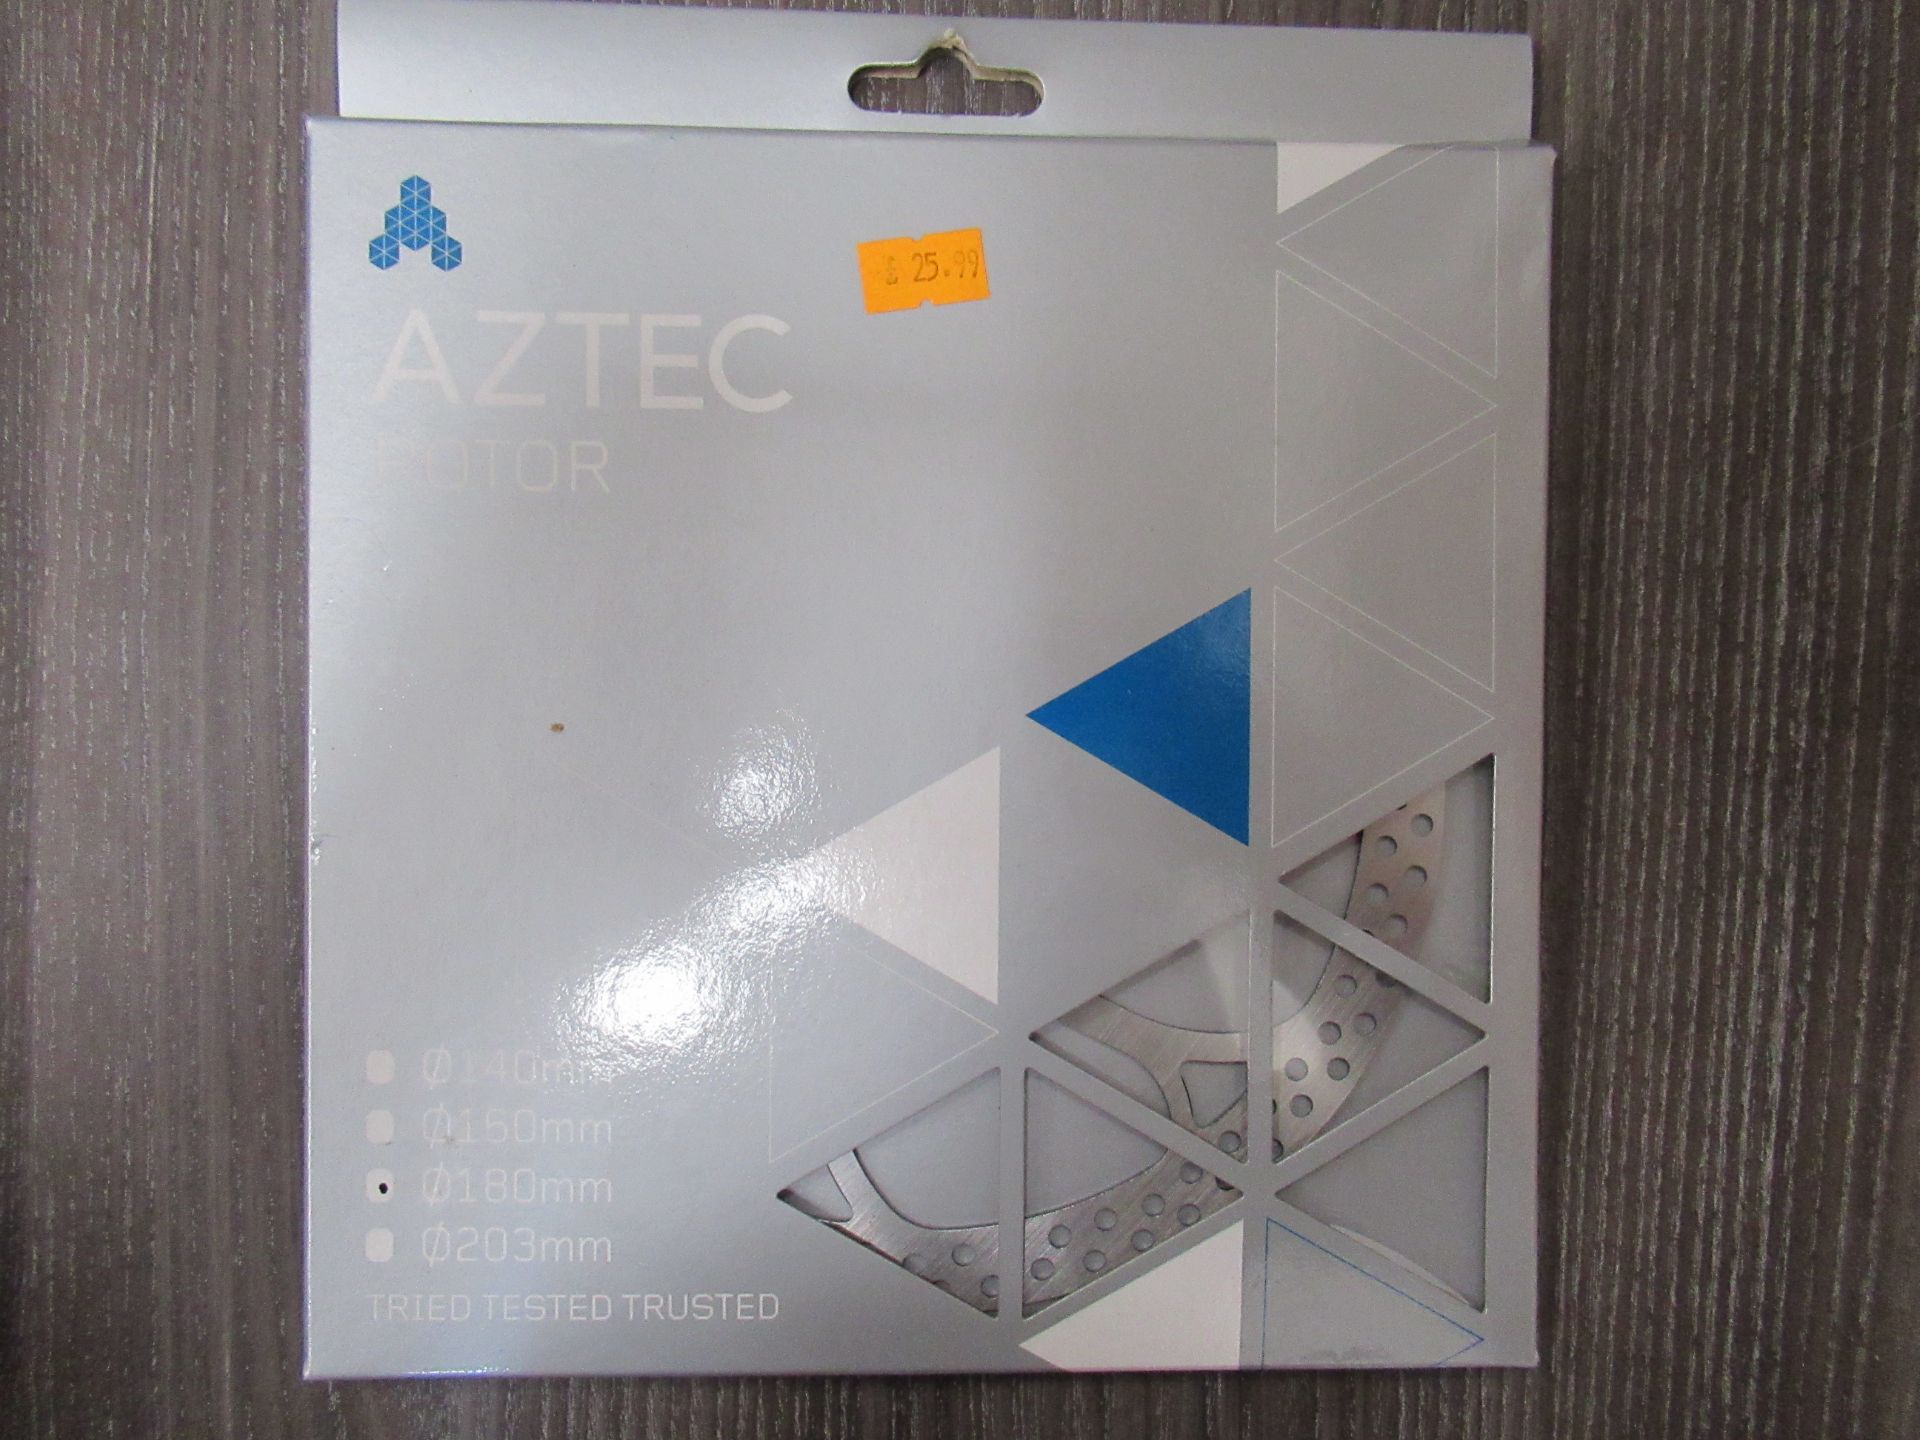 4 x Aztec Rotor's: 2 x 160mm (RRP£22.99); 1 x 180mm (RRP£25.99) and 1 x 203mm (RRP£27.99) - Image 6 of 9